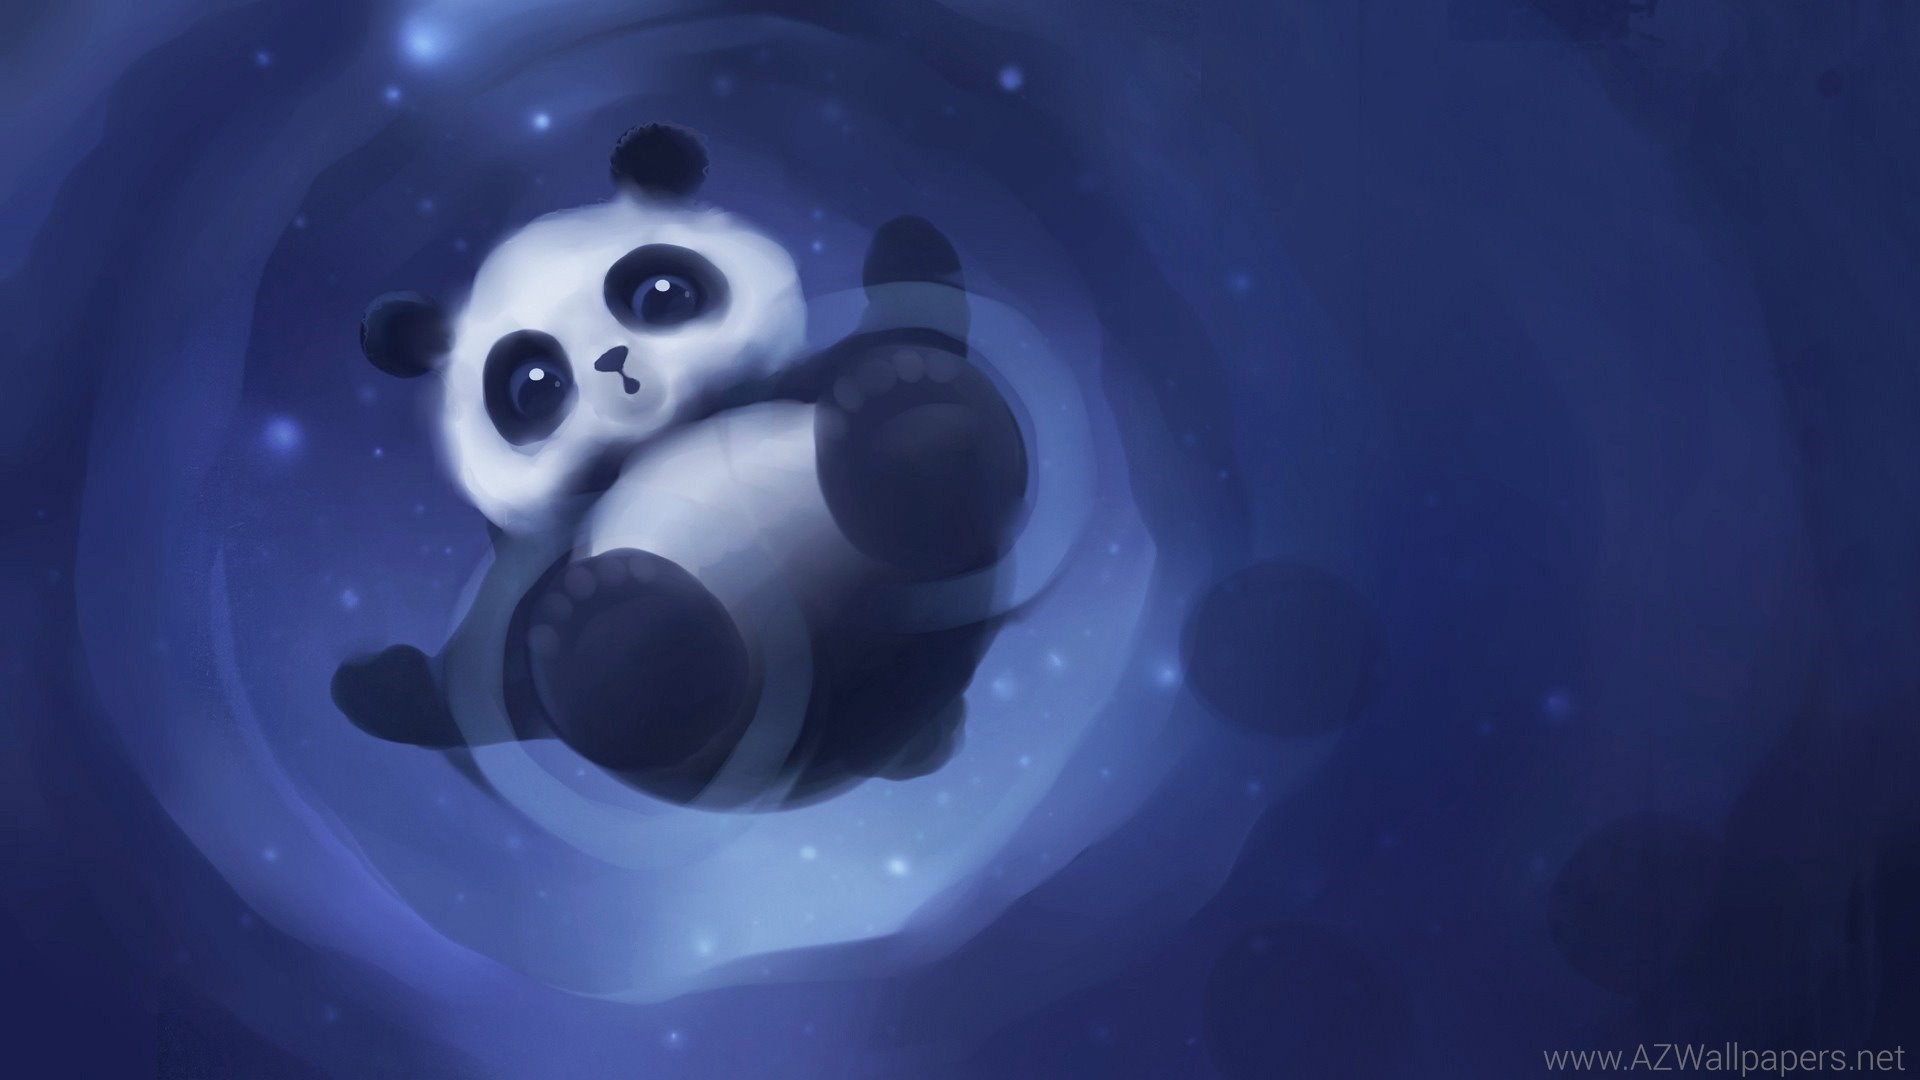 Panda Anime Wallpapers HD Attachment 9635 Amazing Wallpaperz